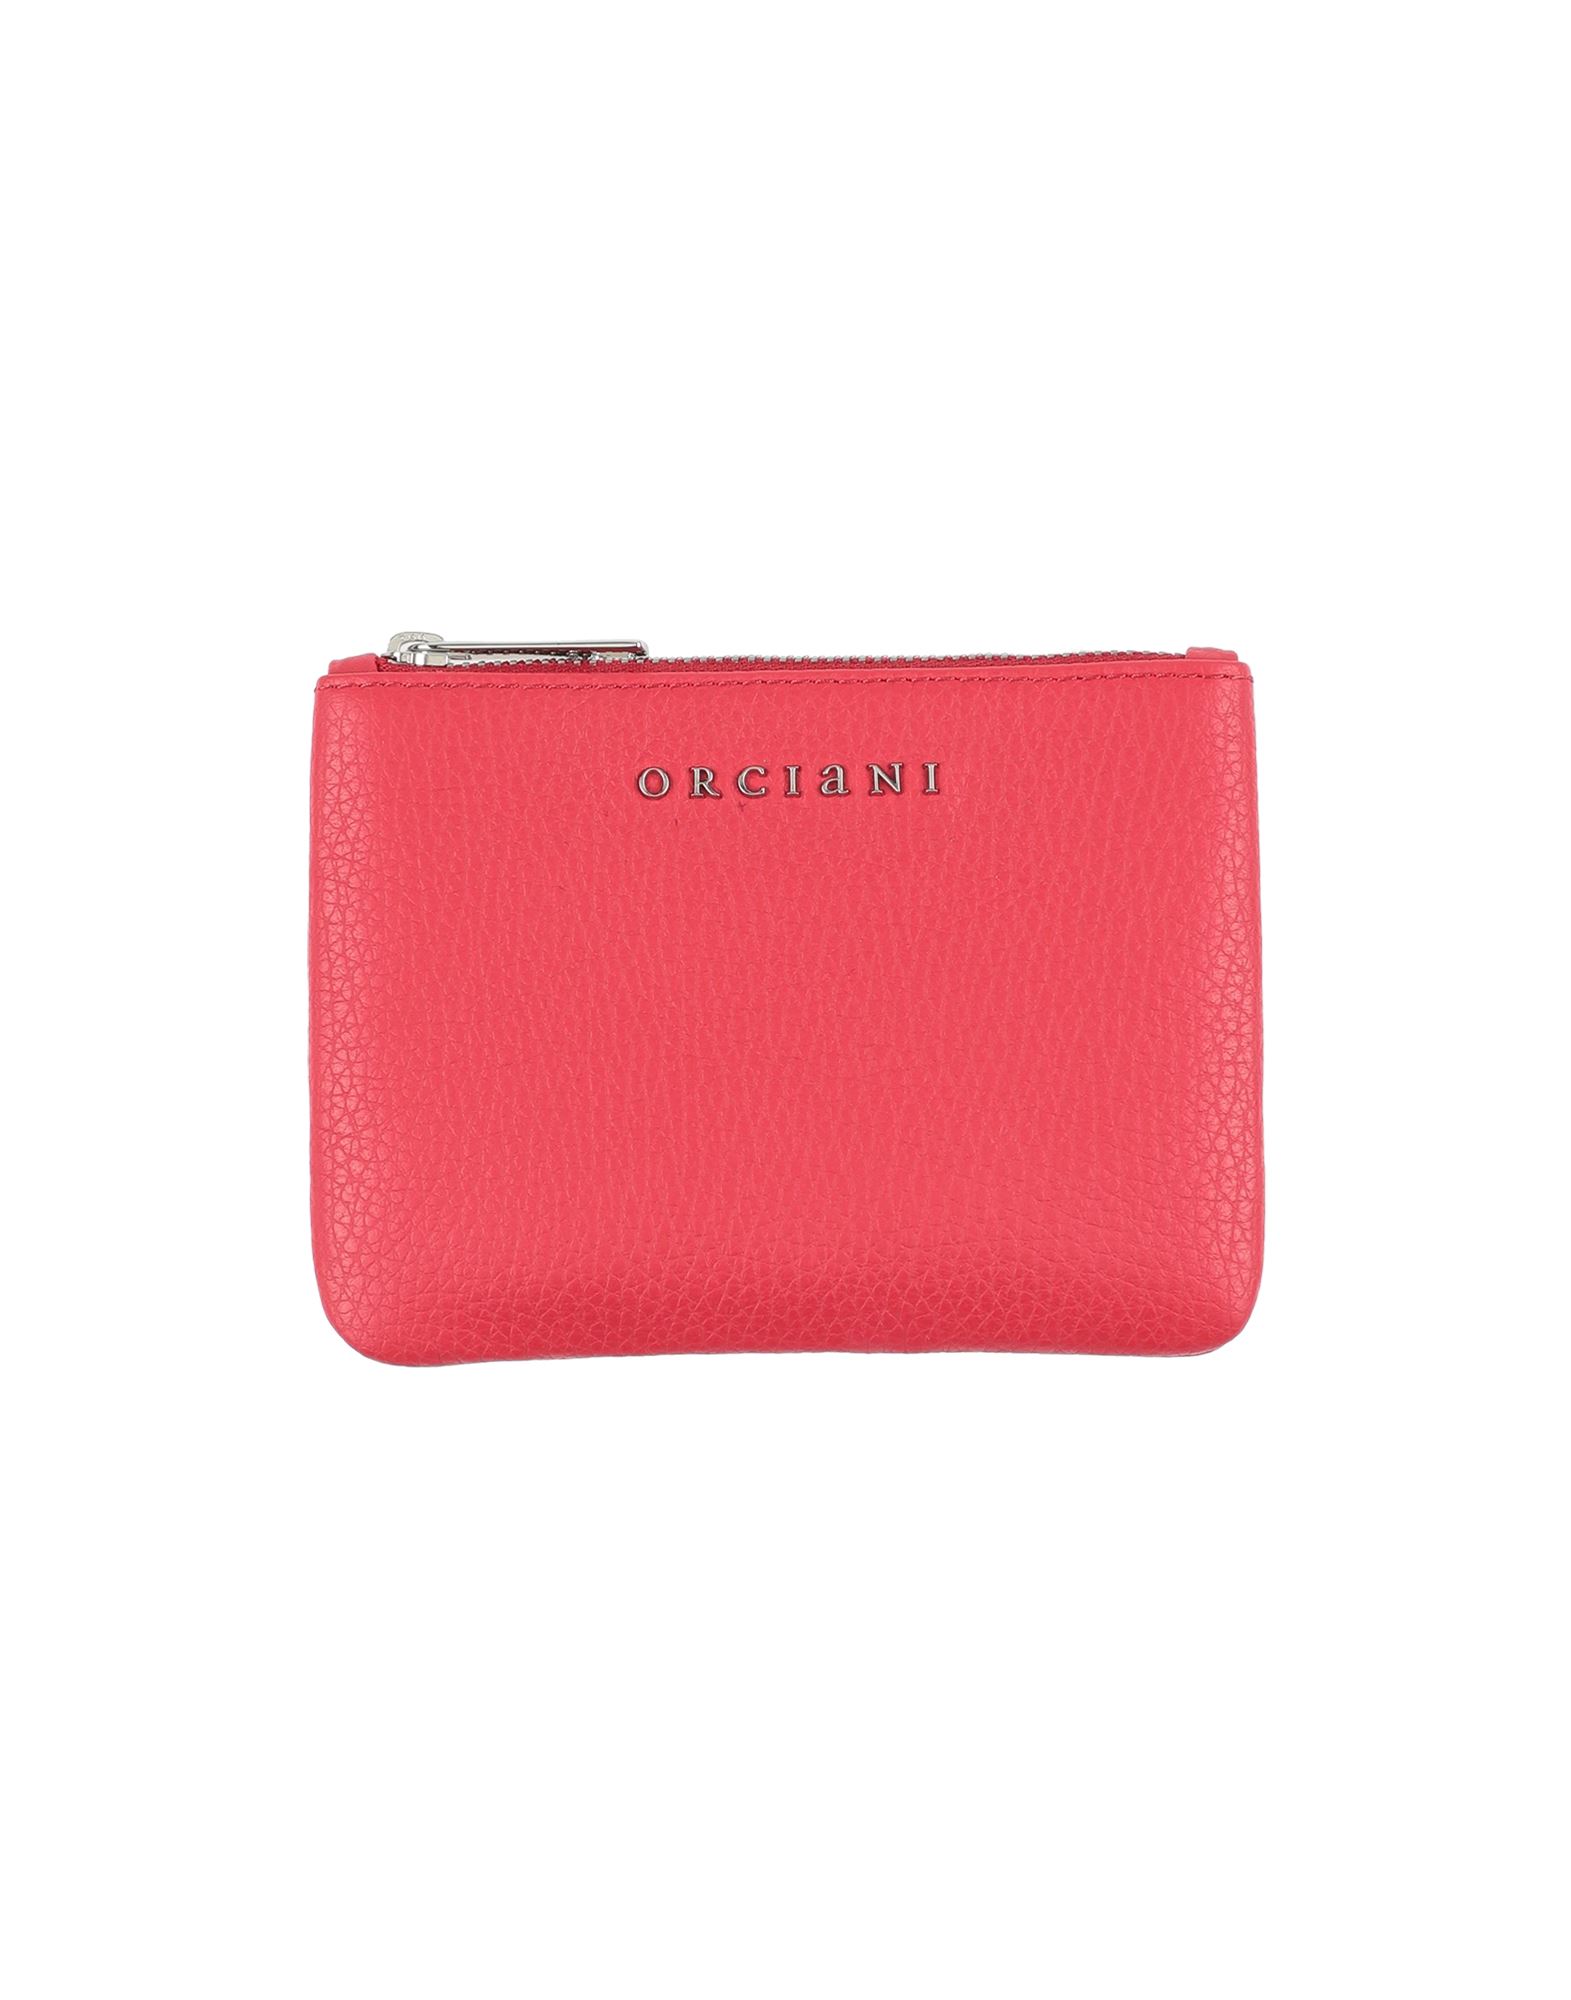 Orciani Coin Purses In Red